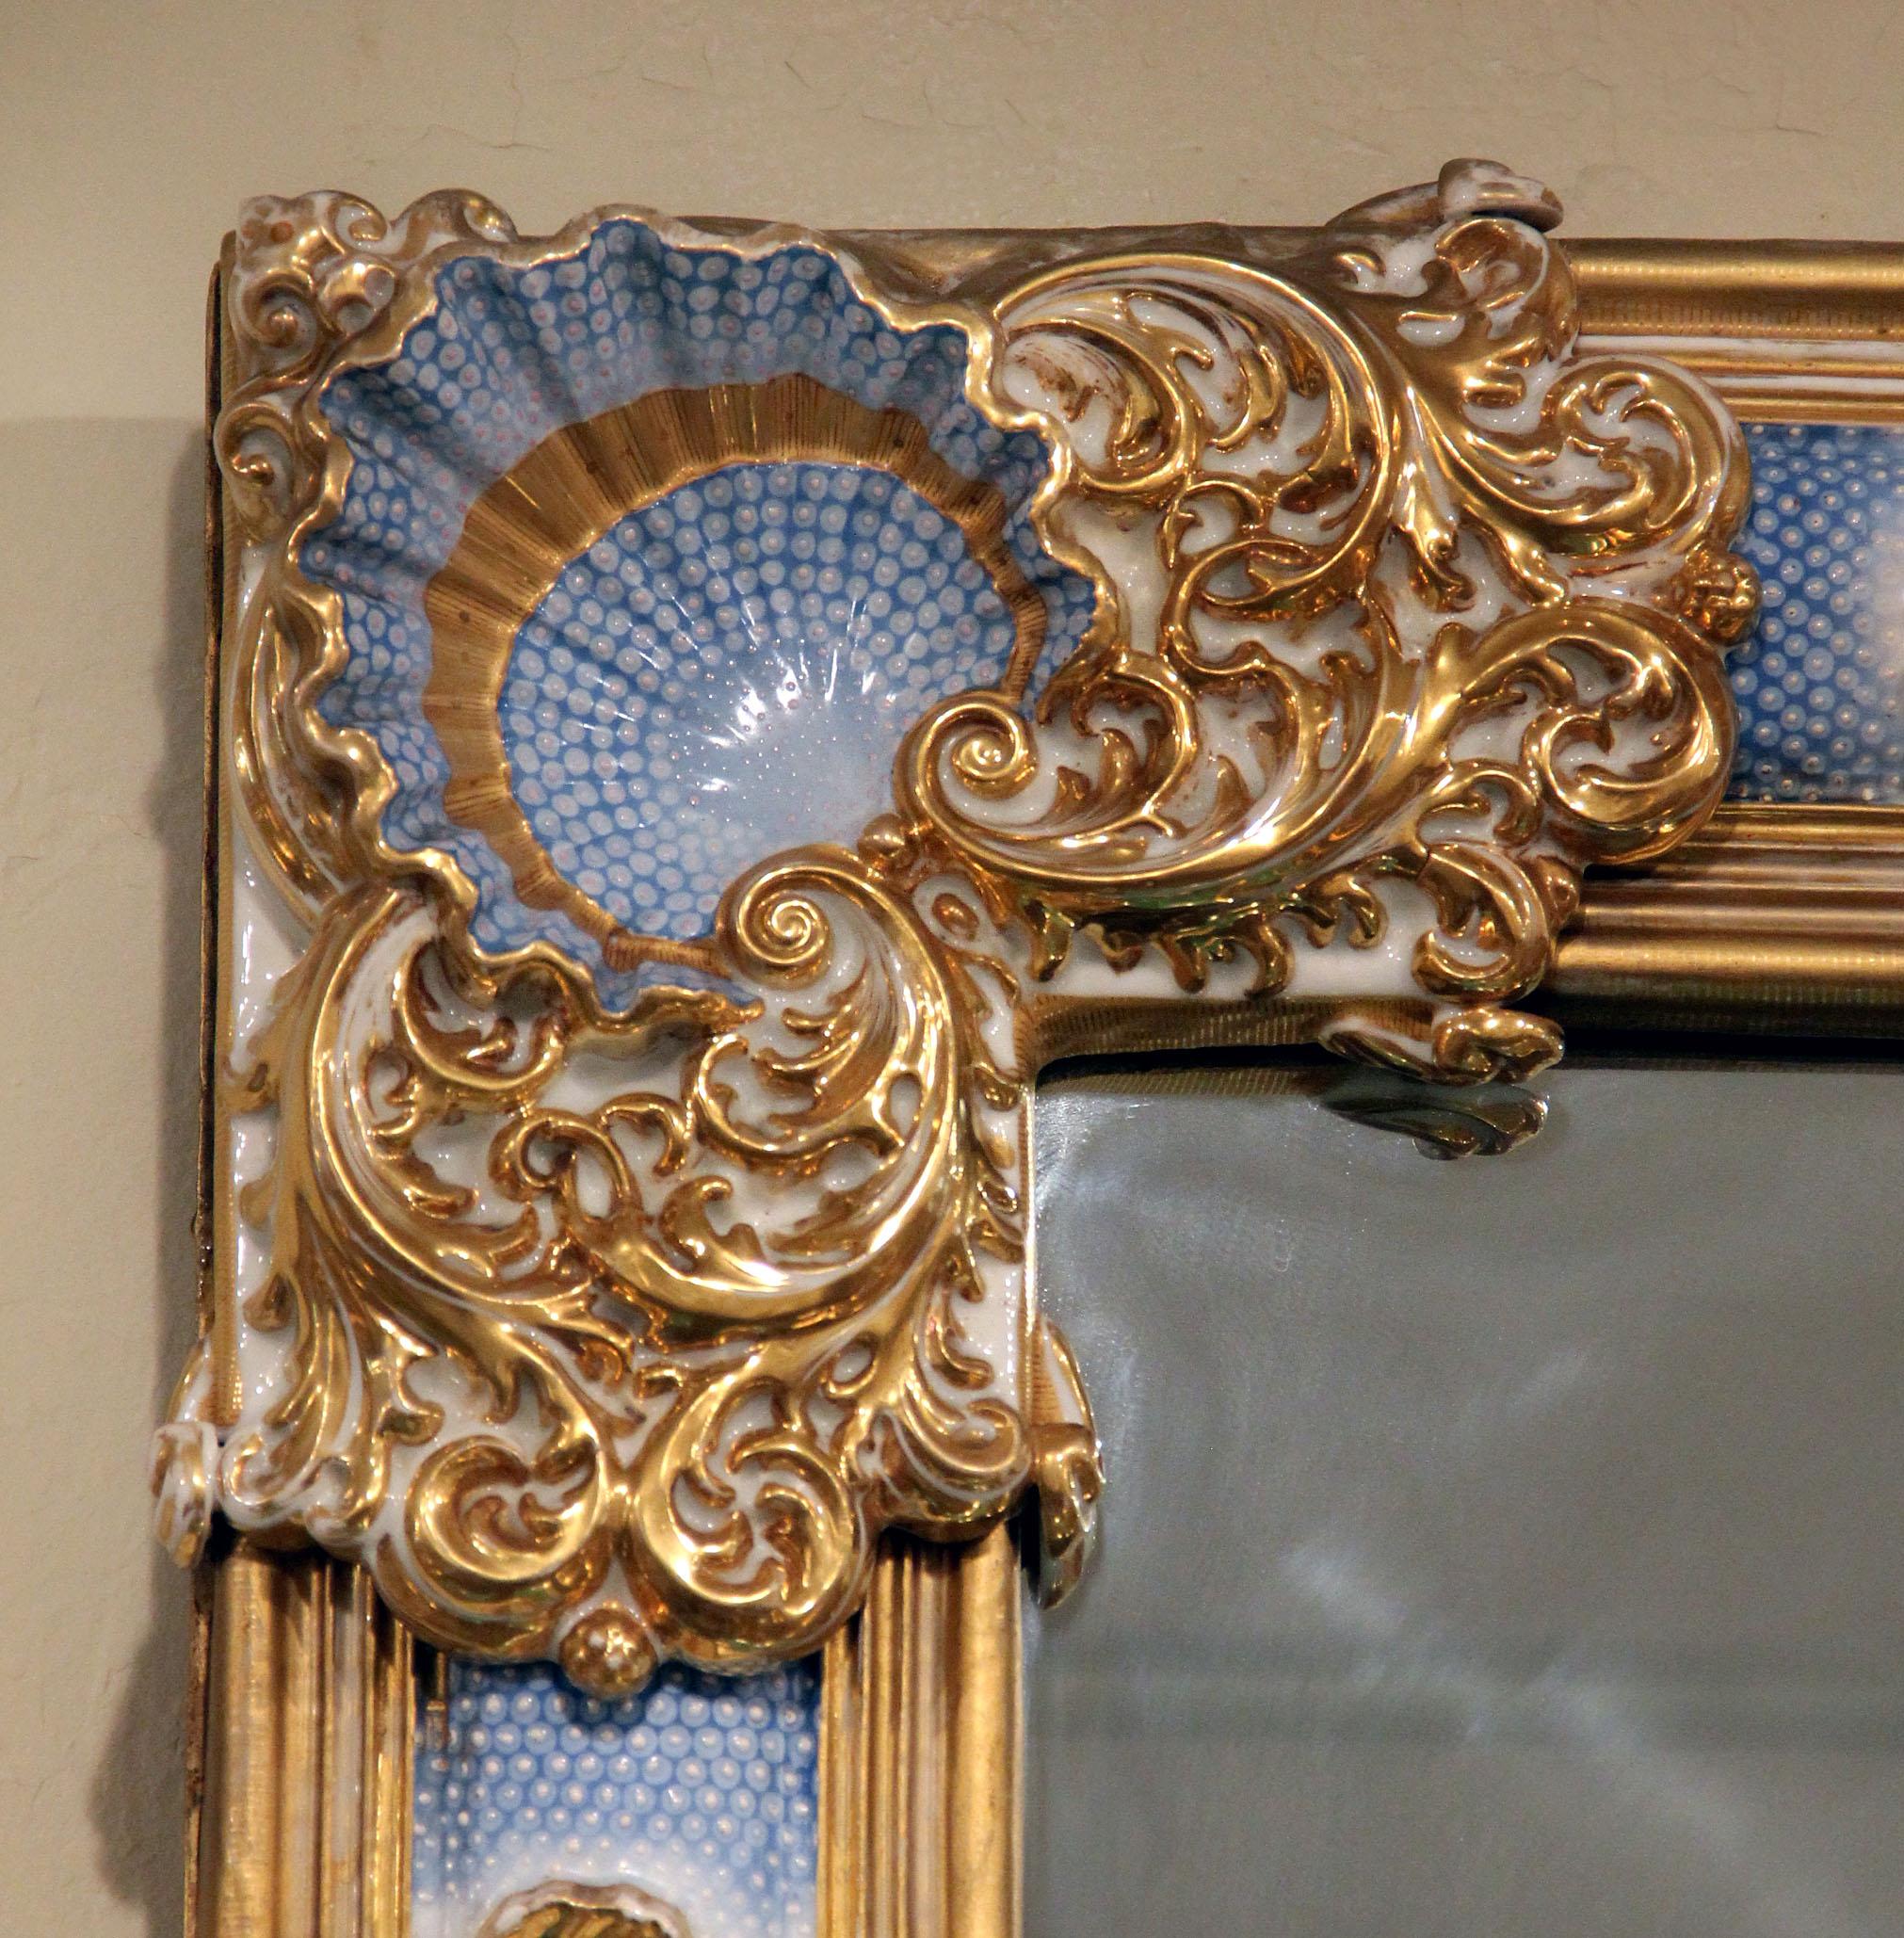 Glass Rare and Special Palatial Pair of Late 19th Century Sèvres Porcelain Mirrors For Sale